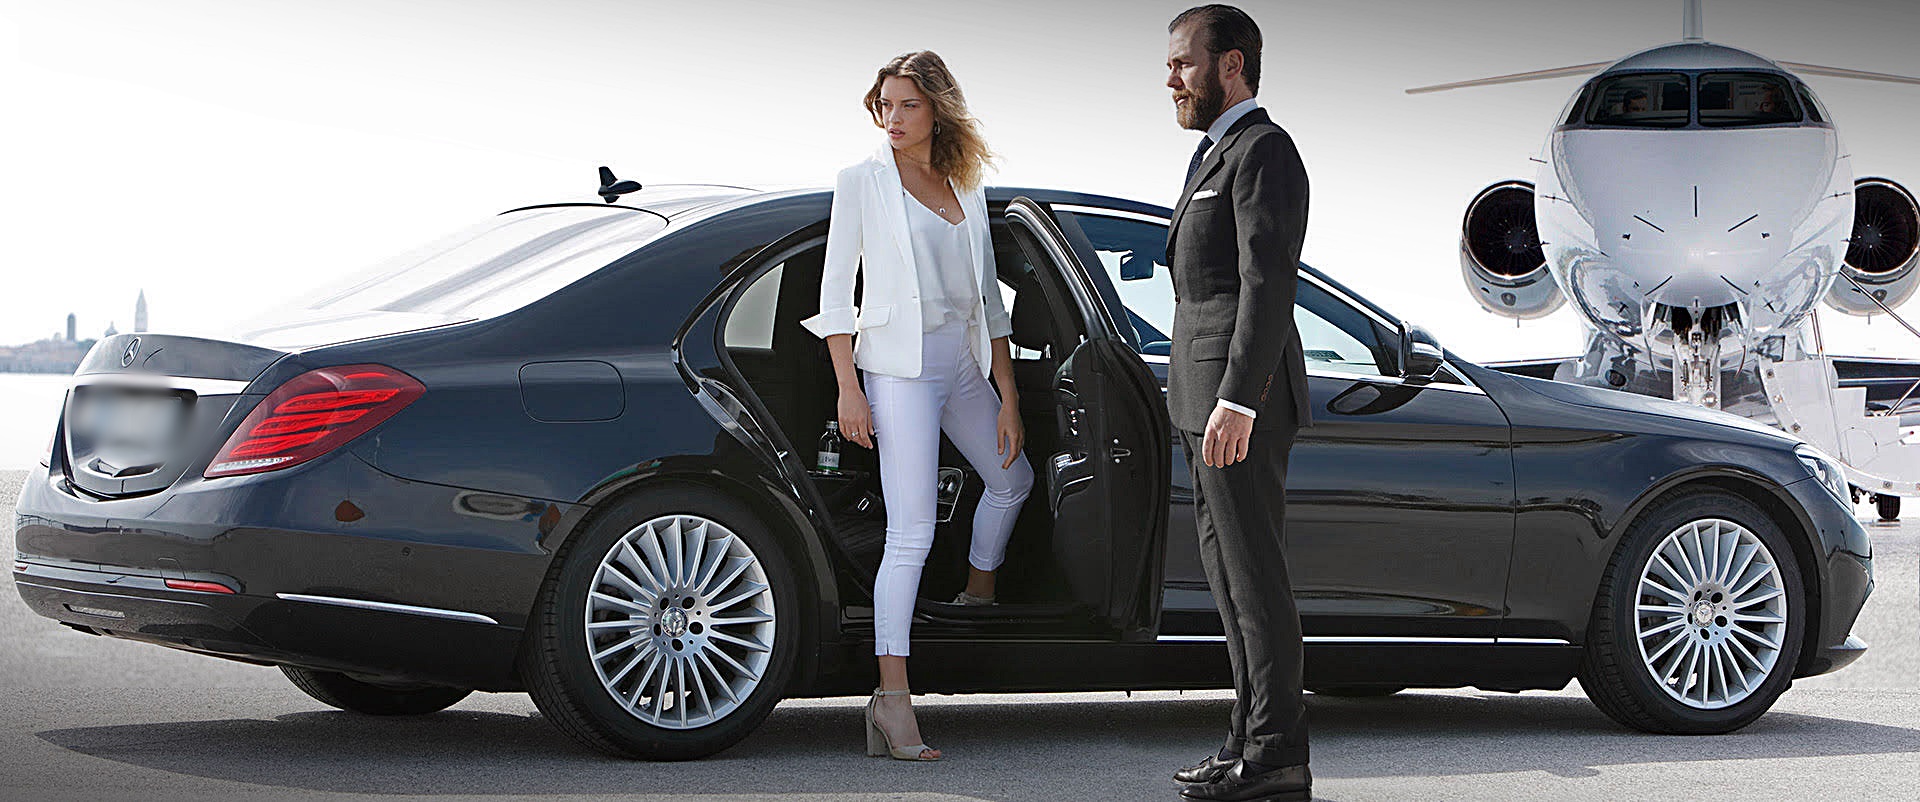 Why Should You Hire a Limousine Company in New York City?